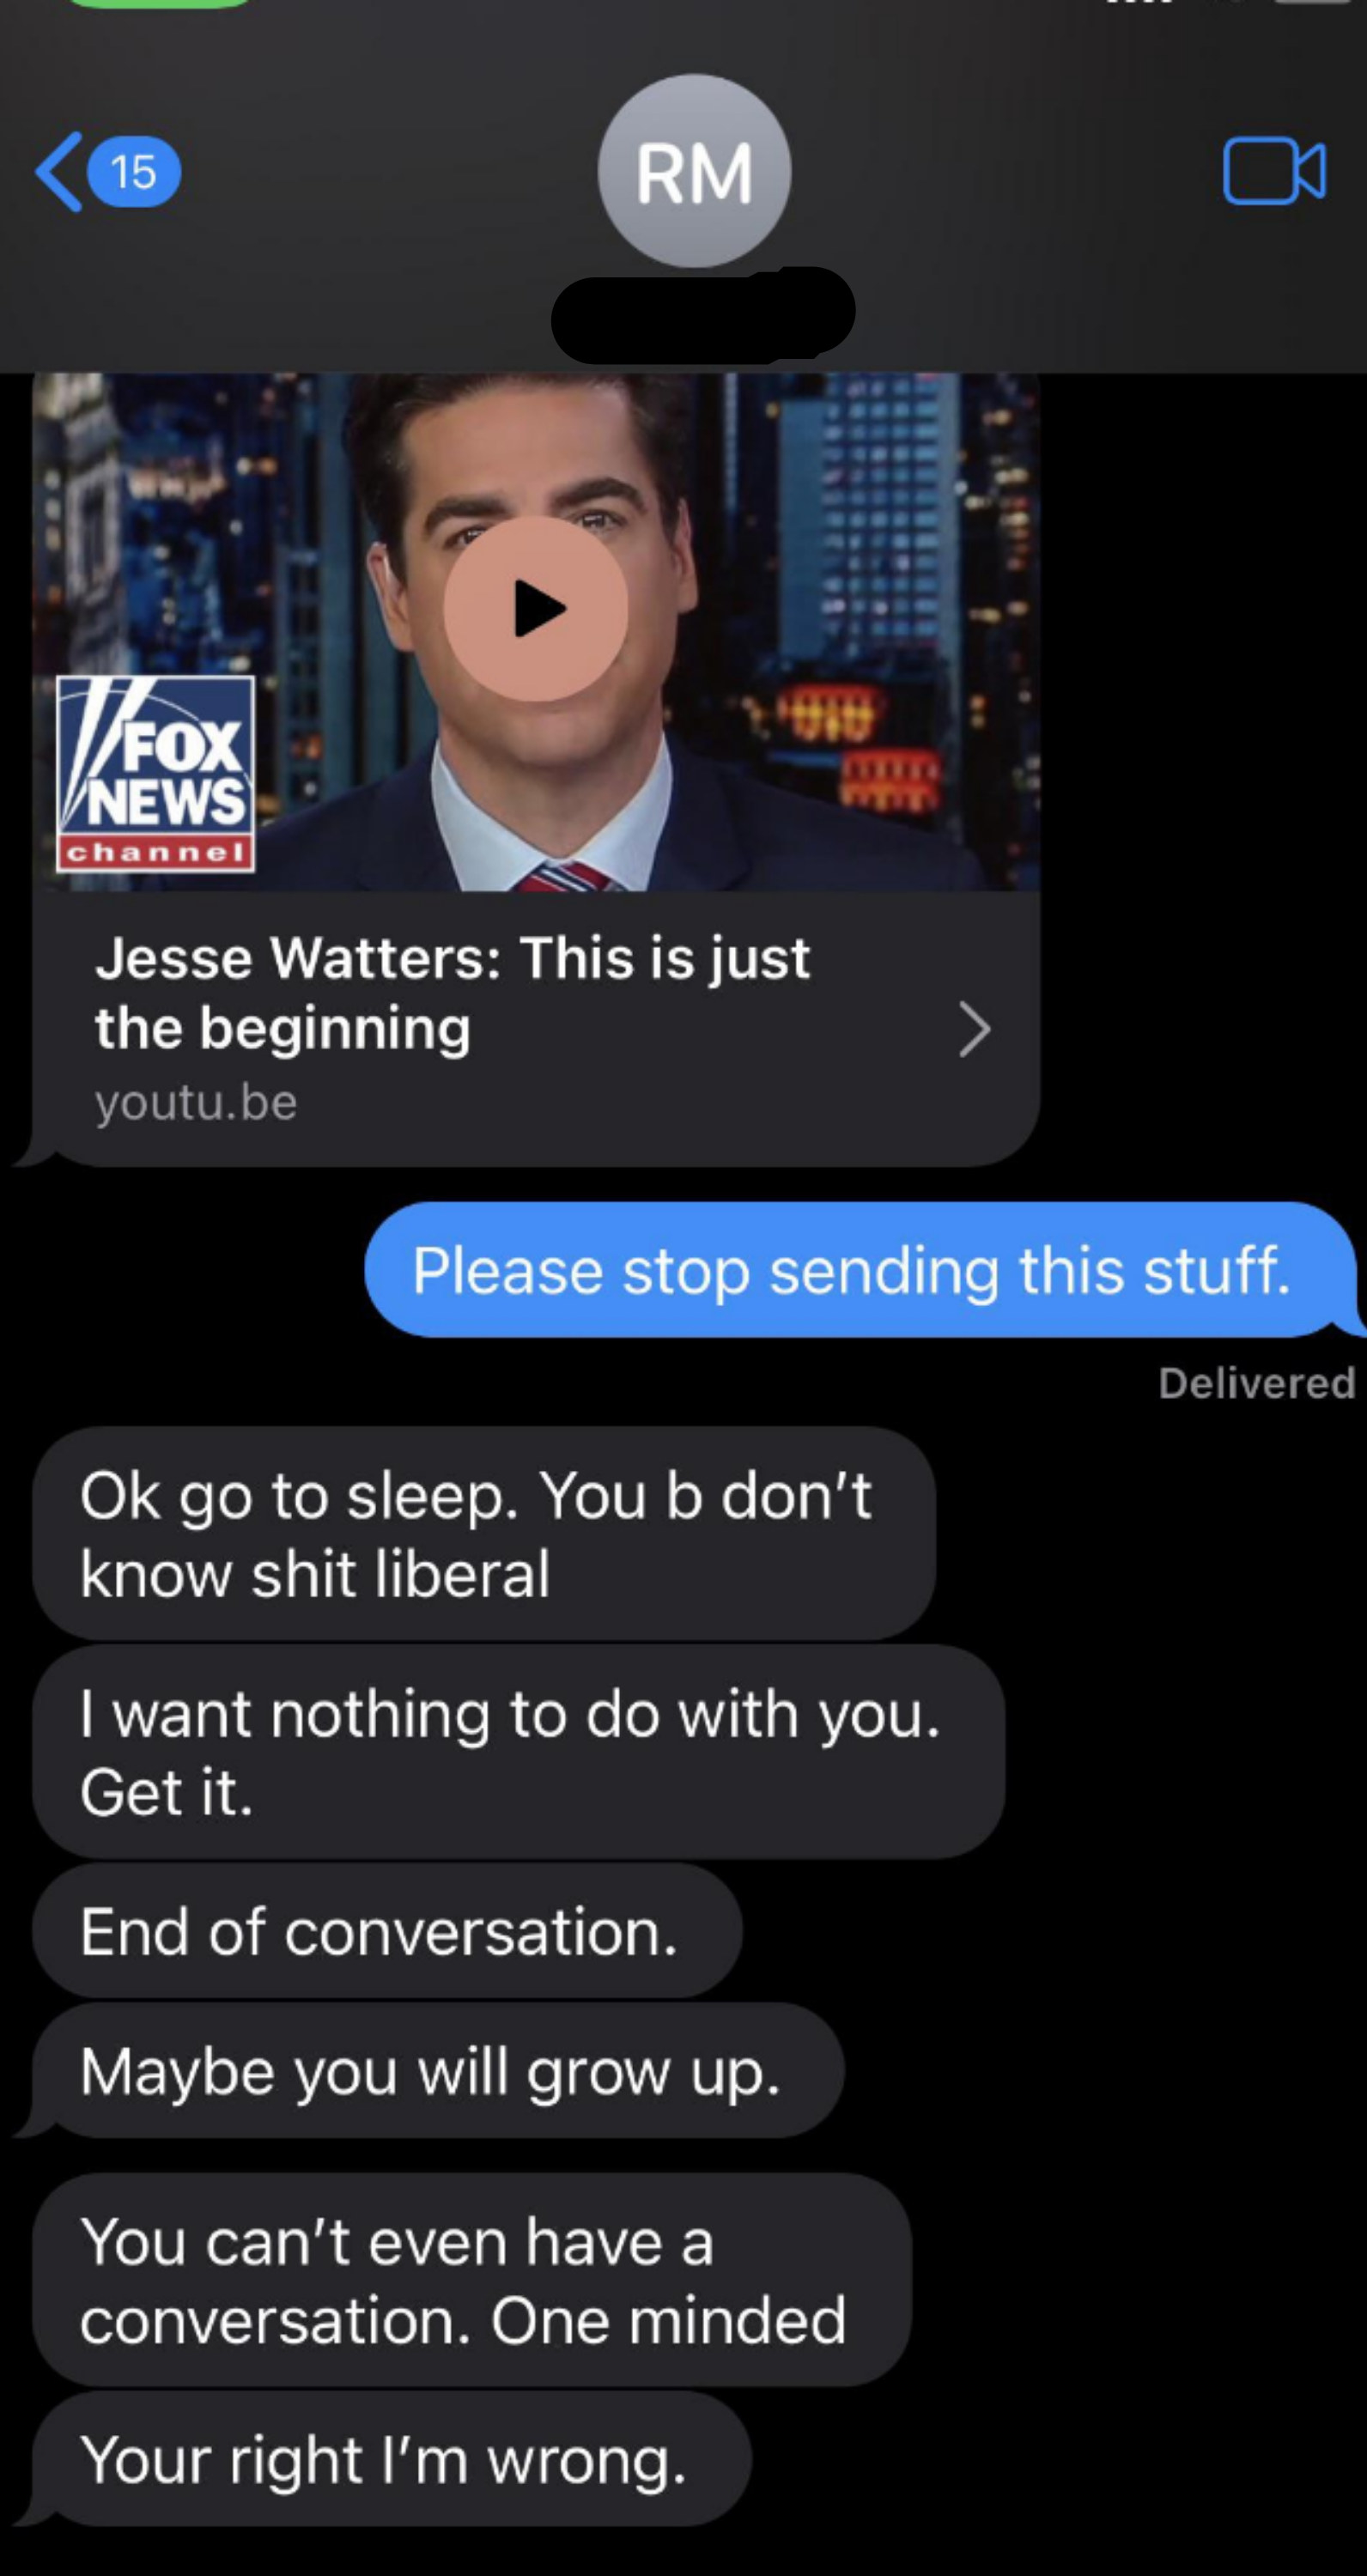 The parent sends a Fox News clip, the child asks them to stop, and the parent responds with a rant that says &quot;you don&#x27;t know shit liberal&quot; and &quot;I want nothing to do with you&quot;